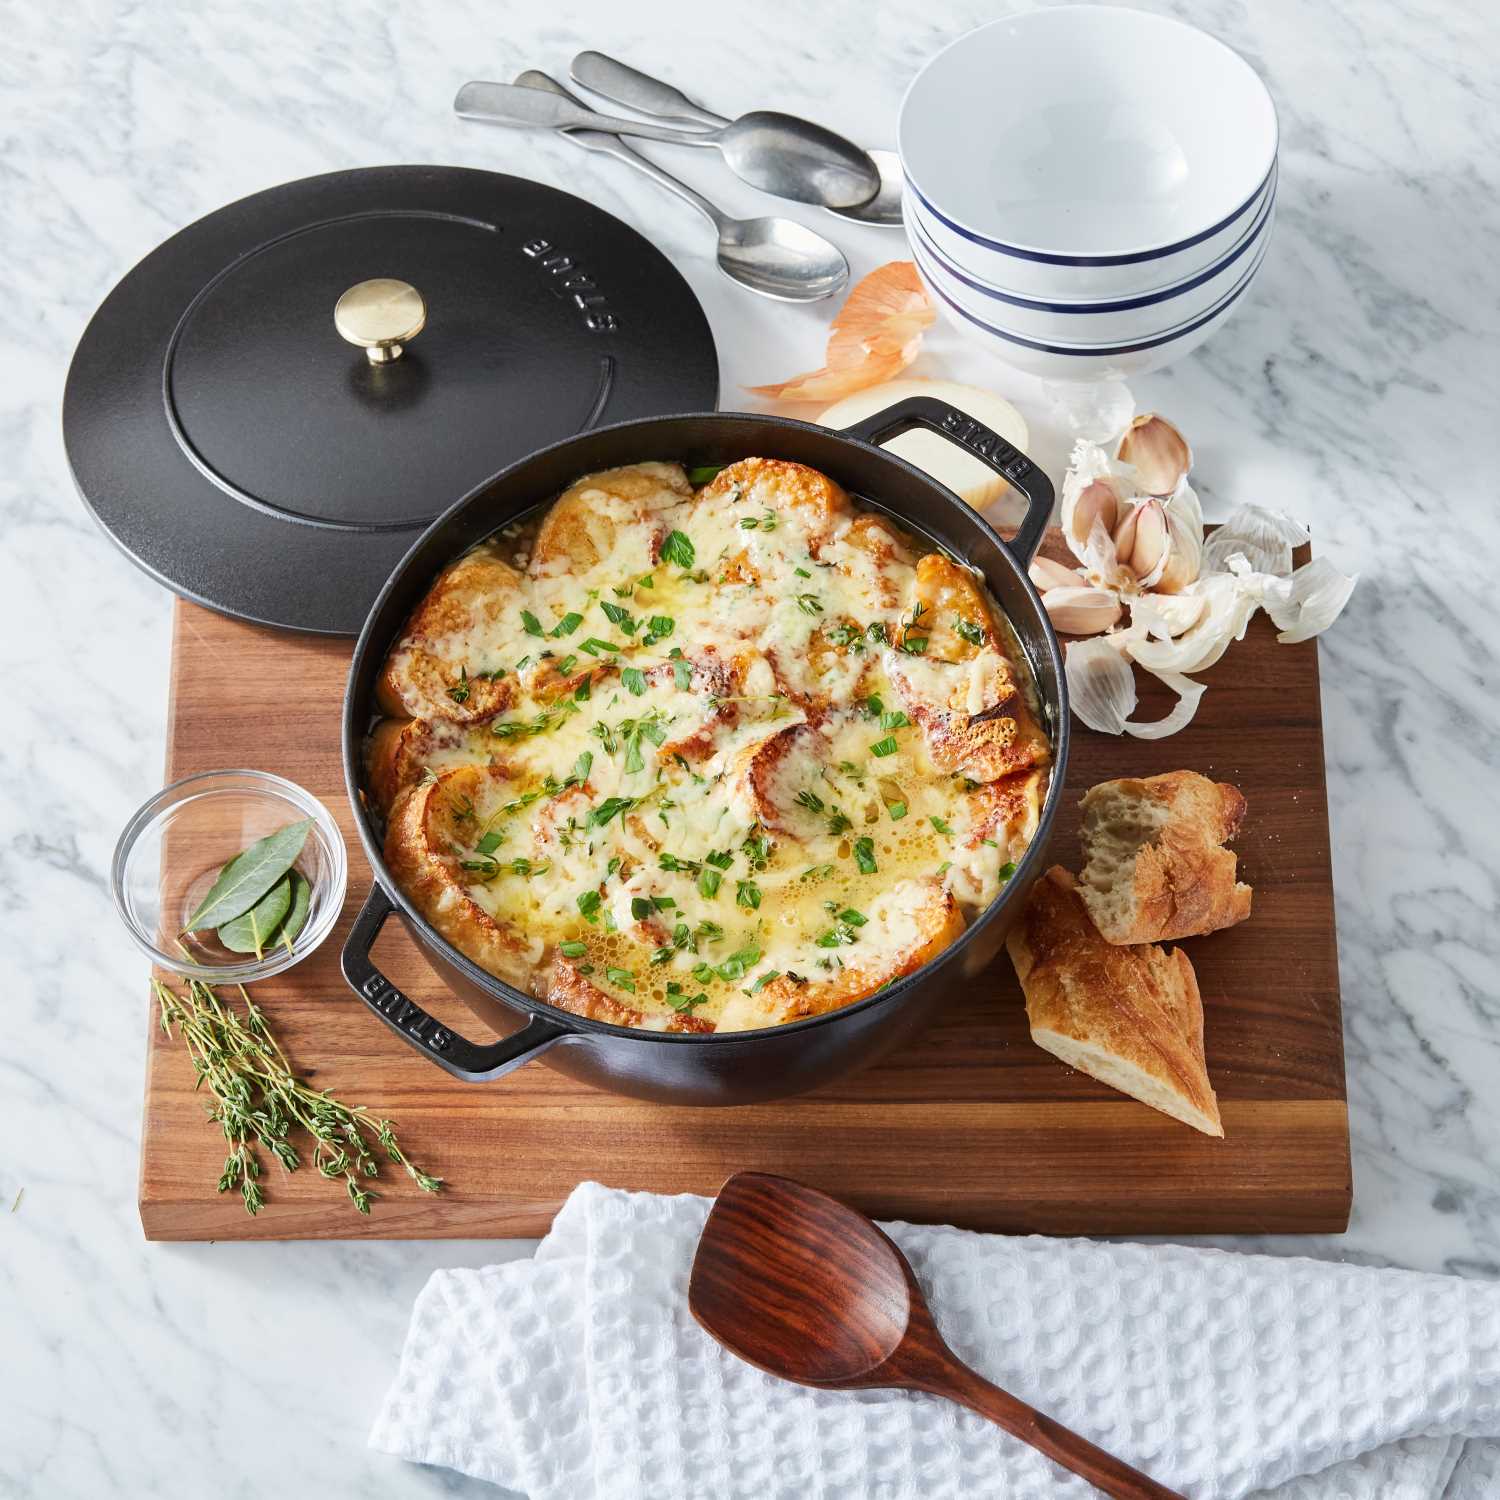 2023 sur la table holiday gift guide, gifts for the cook, staub gifts